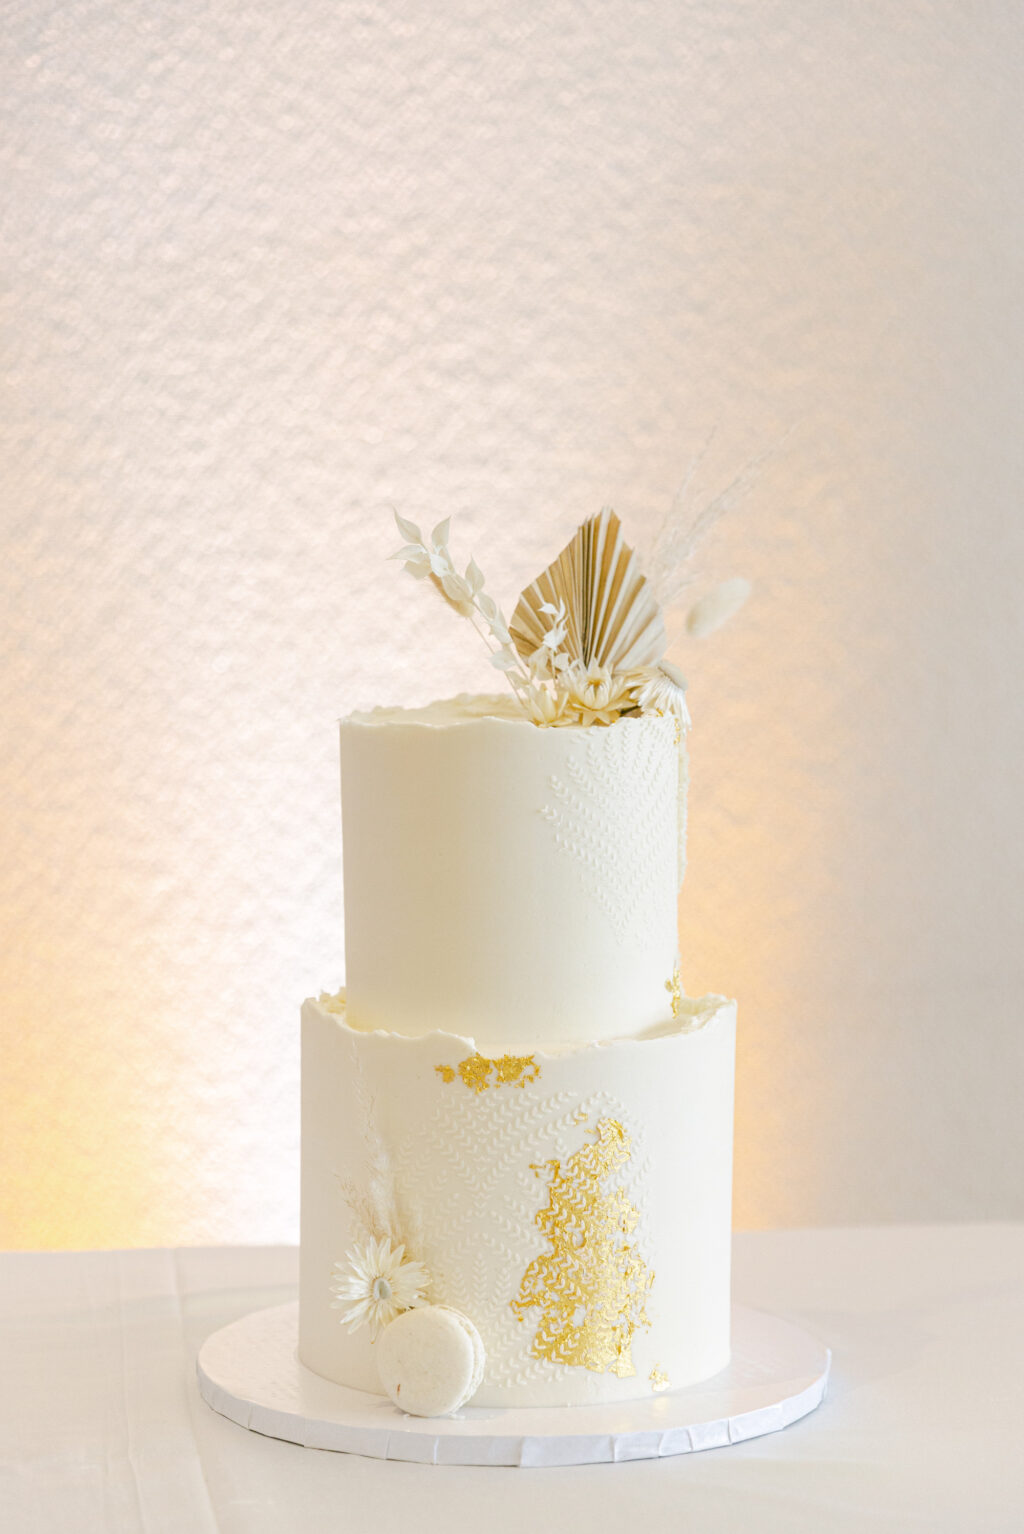 White Two-tier Textured Boho Round Wedding Cake with Dried Flower Accents, Macarons and Gold Foil Ideas